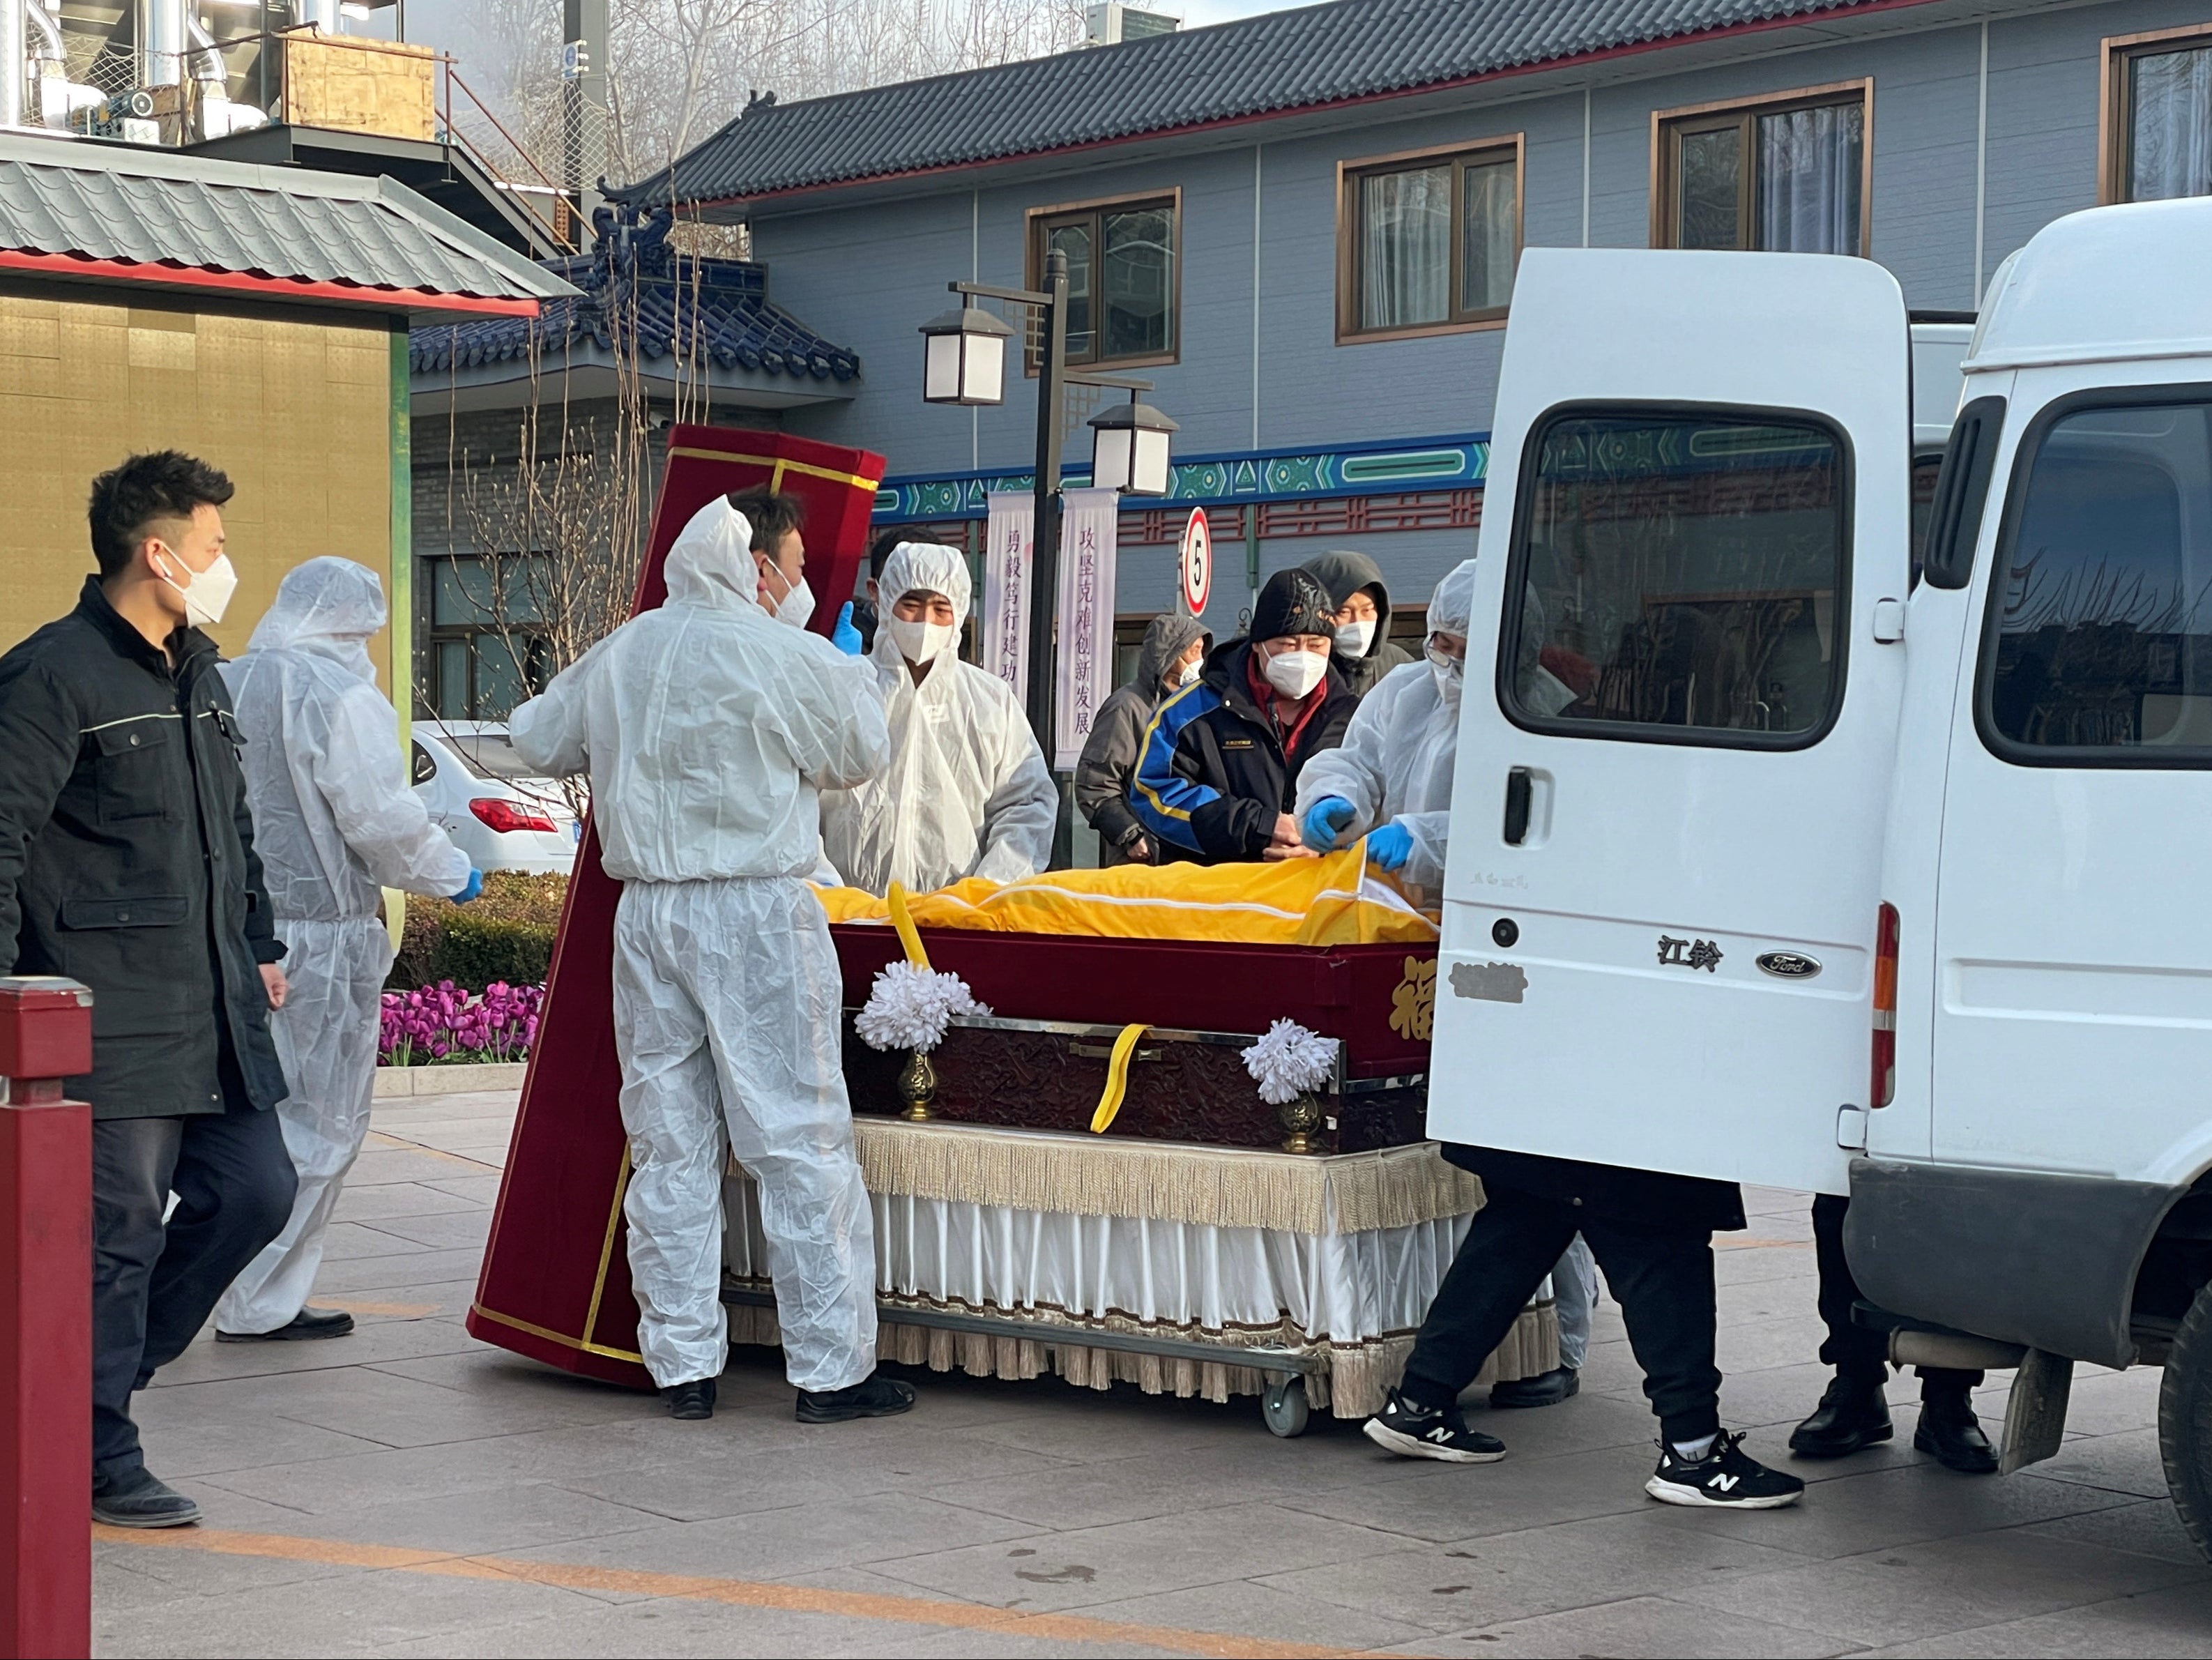 Workers in protective suits transfer a body in a casket at a funeral home